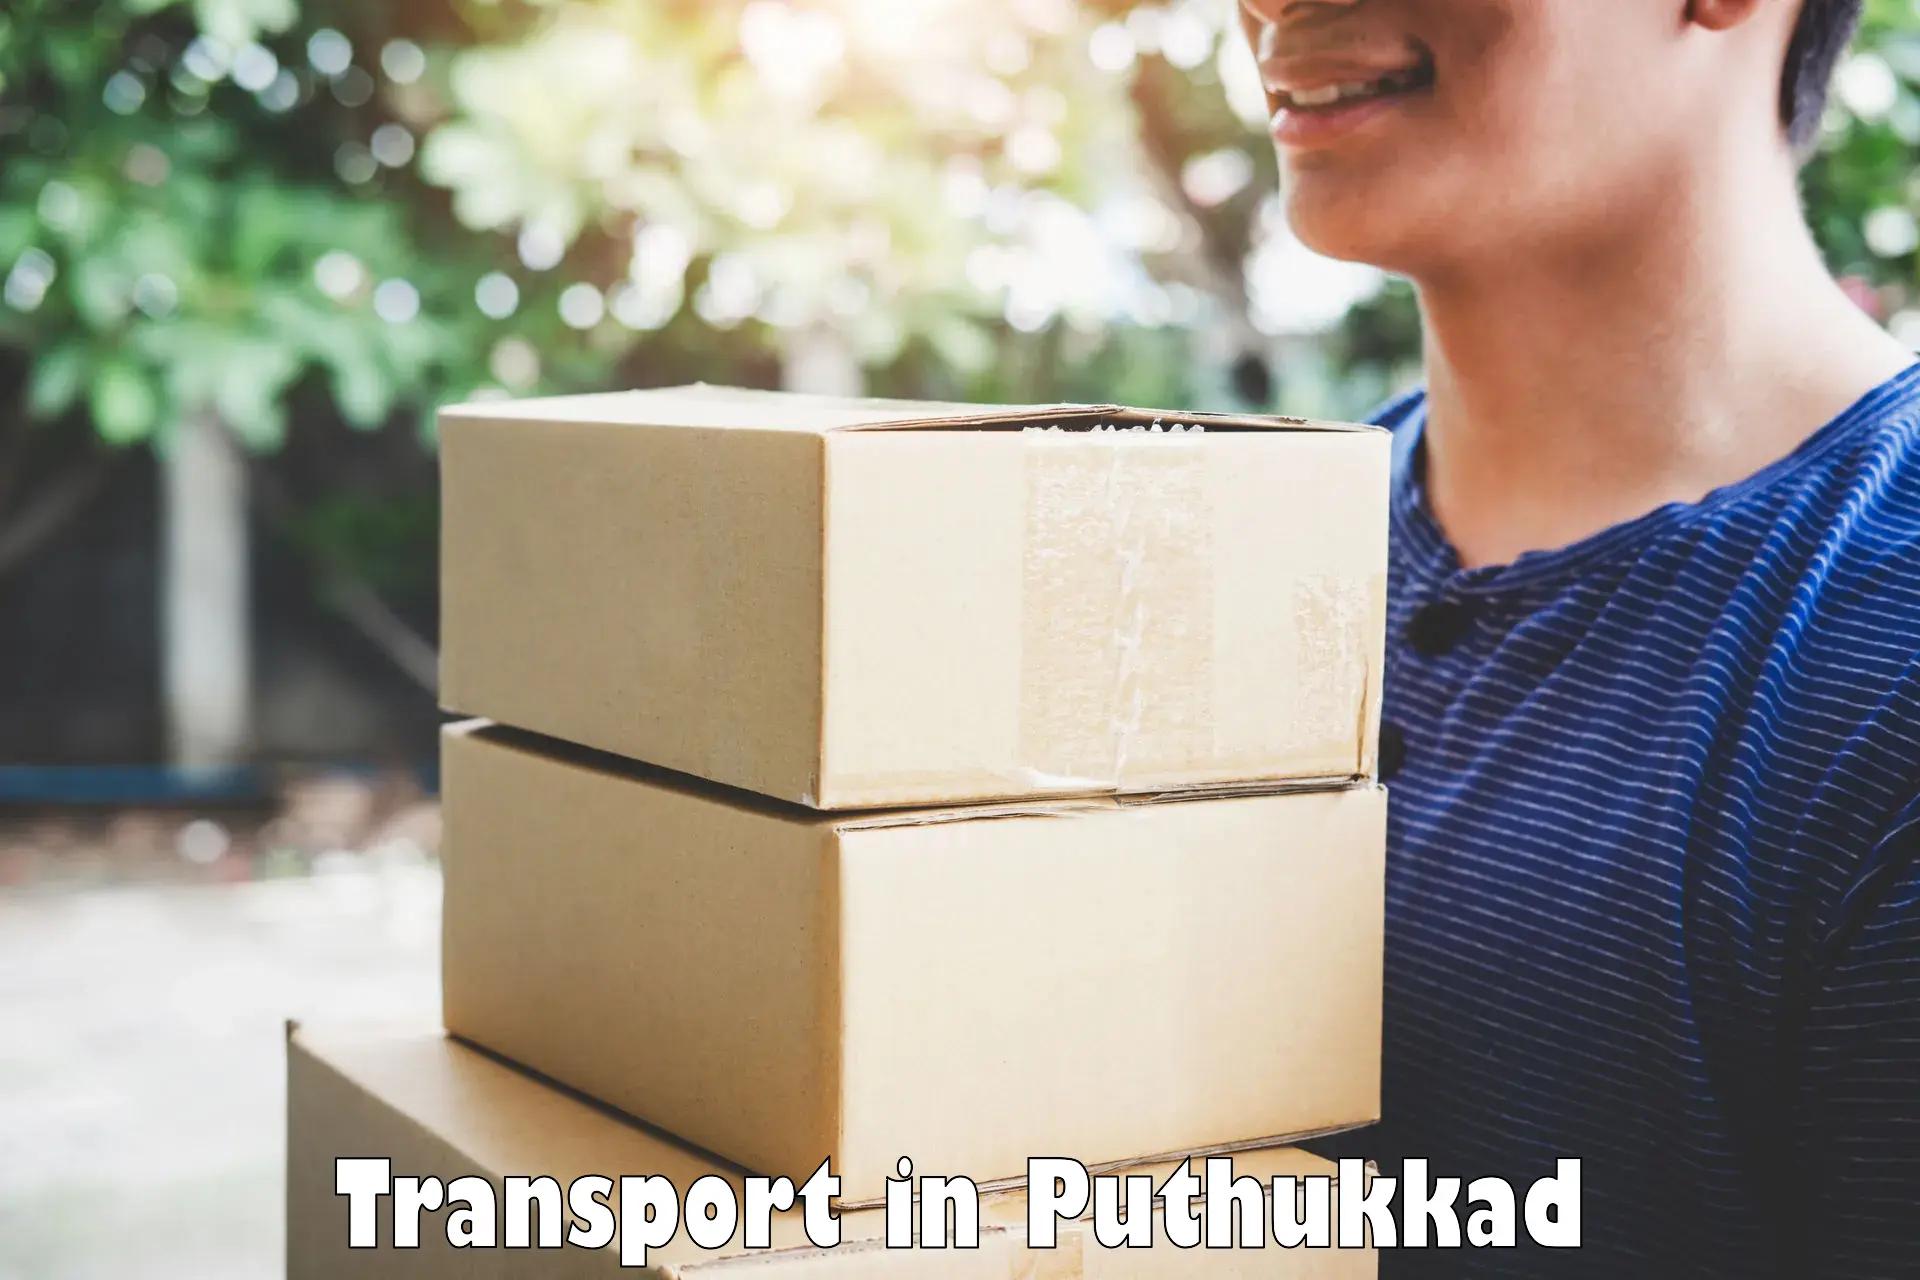 Express transport services in Puthukkad